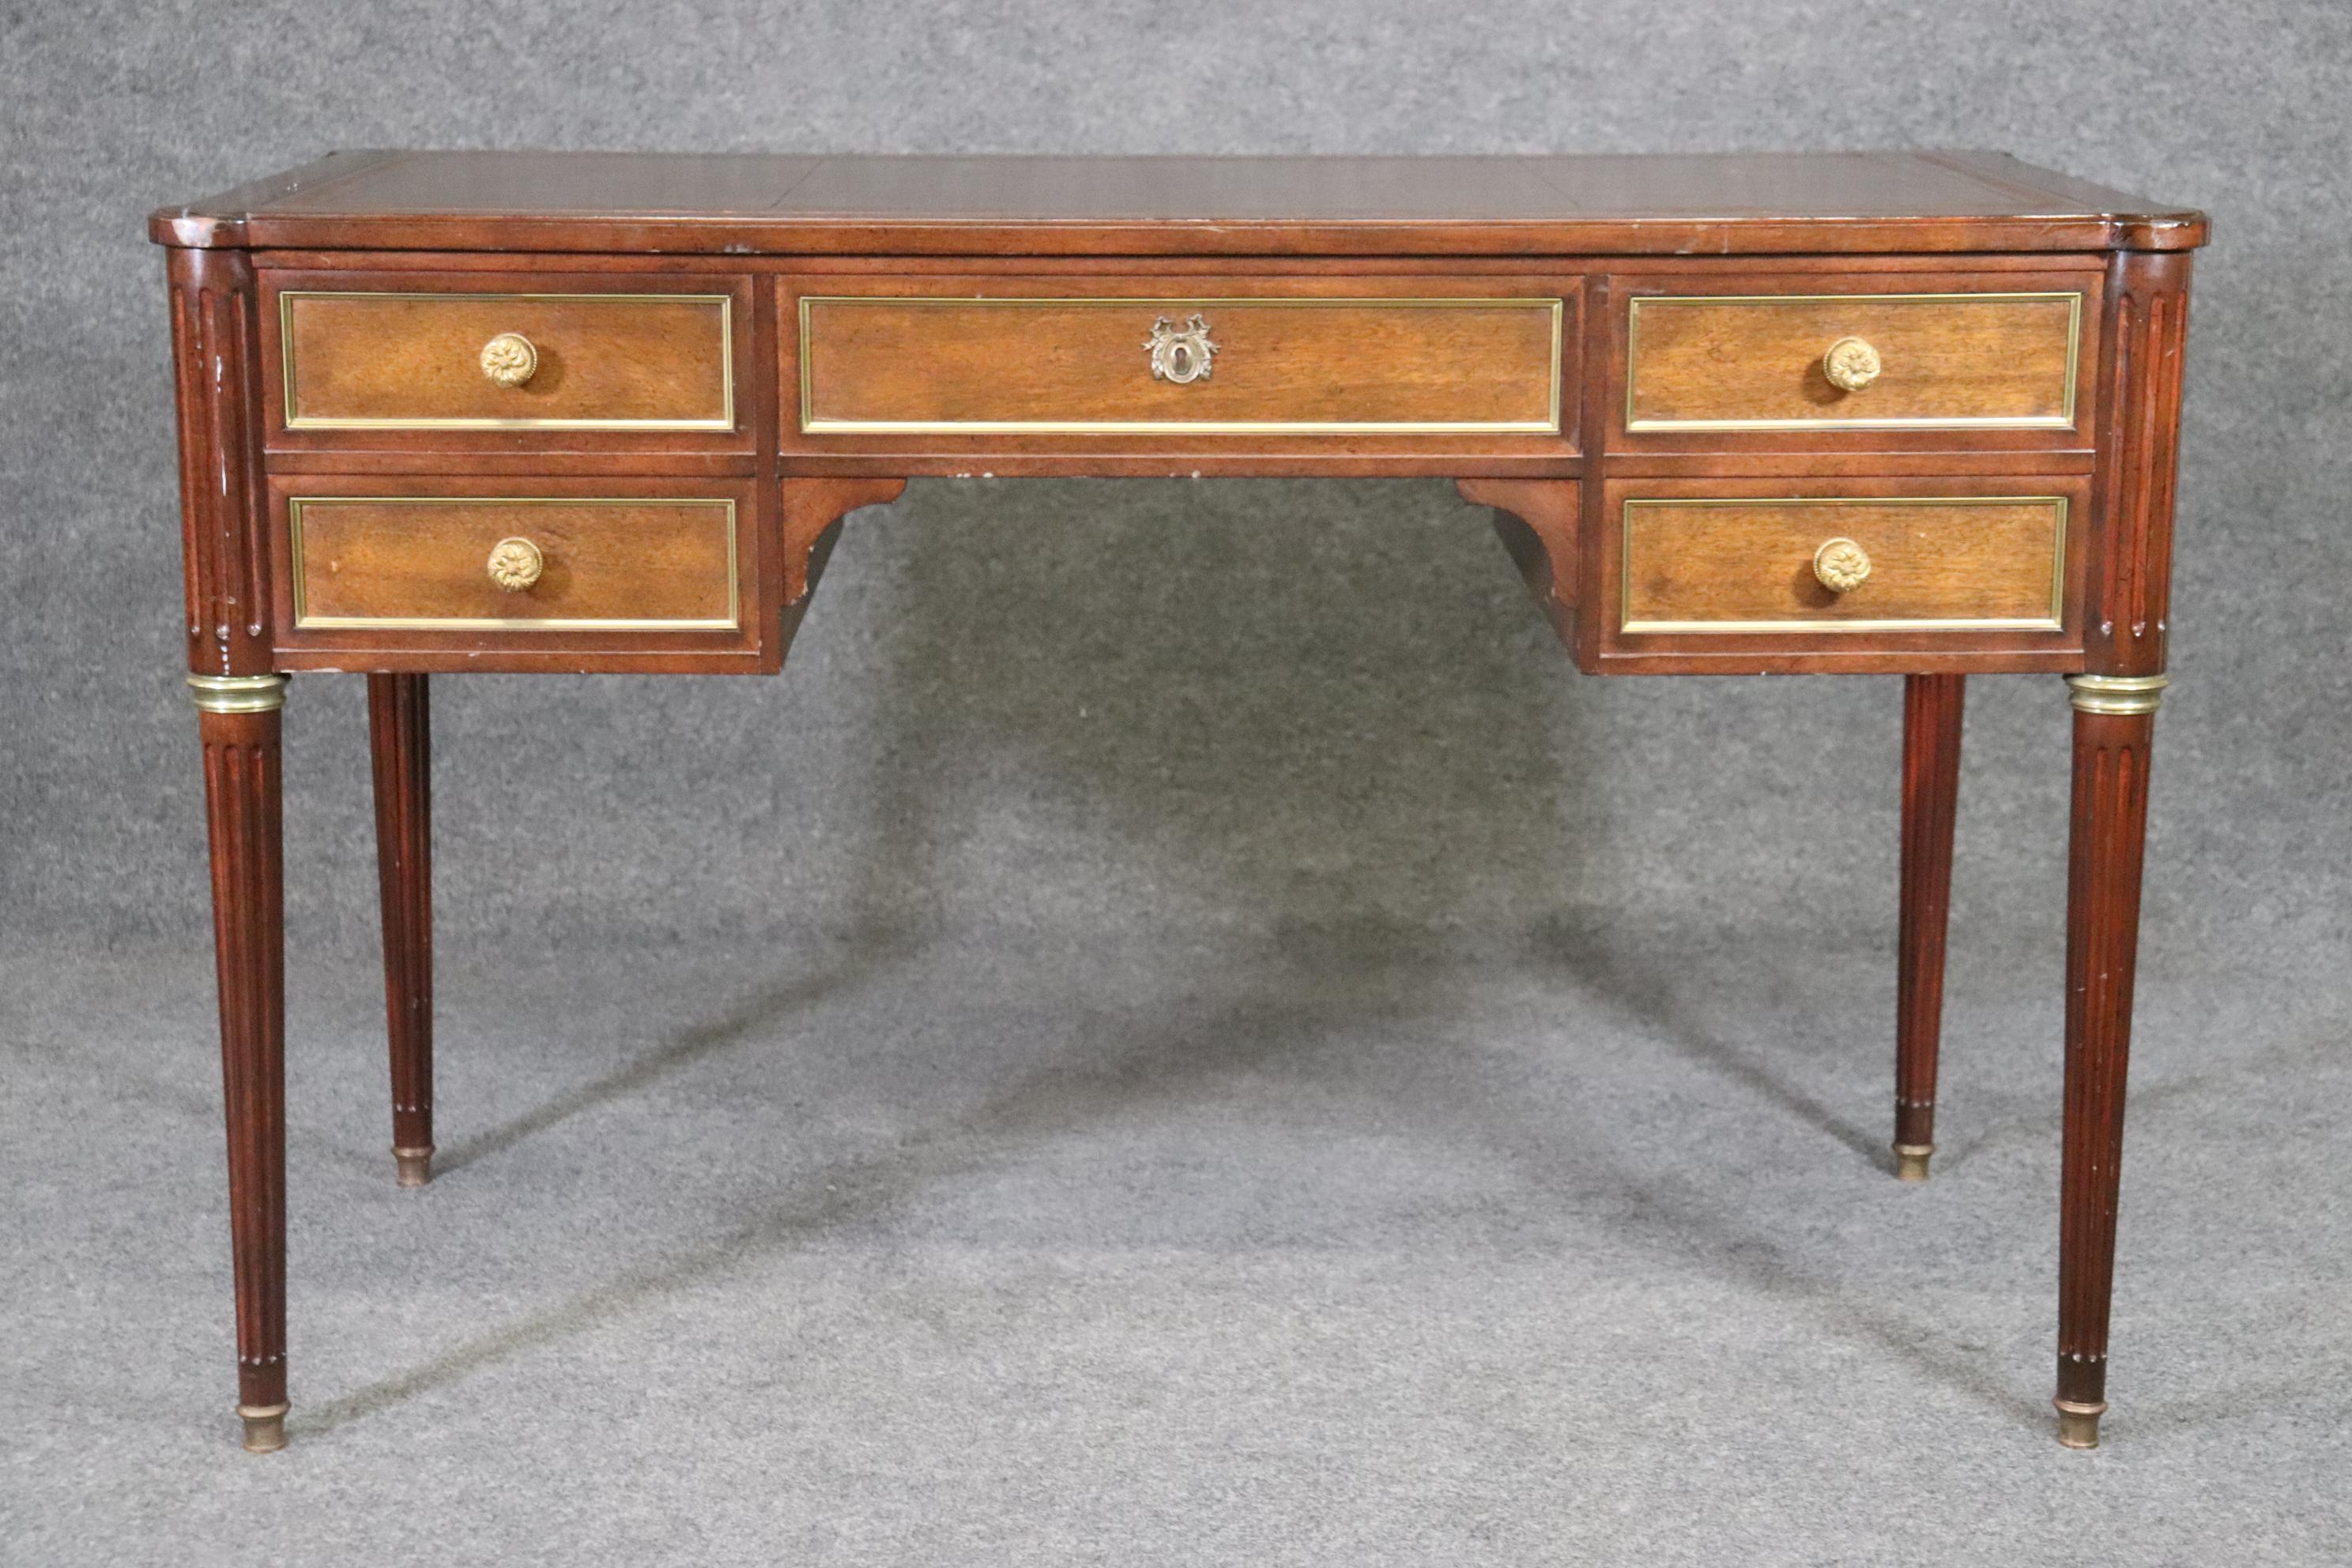 Fine Quality French Directore Louis XVI Style Leather Top Faux Partners Desk In Good Condition For Sale In Swedesboro, NJ